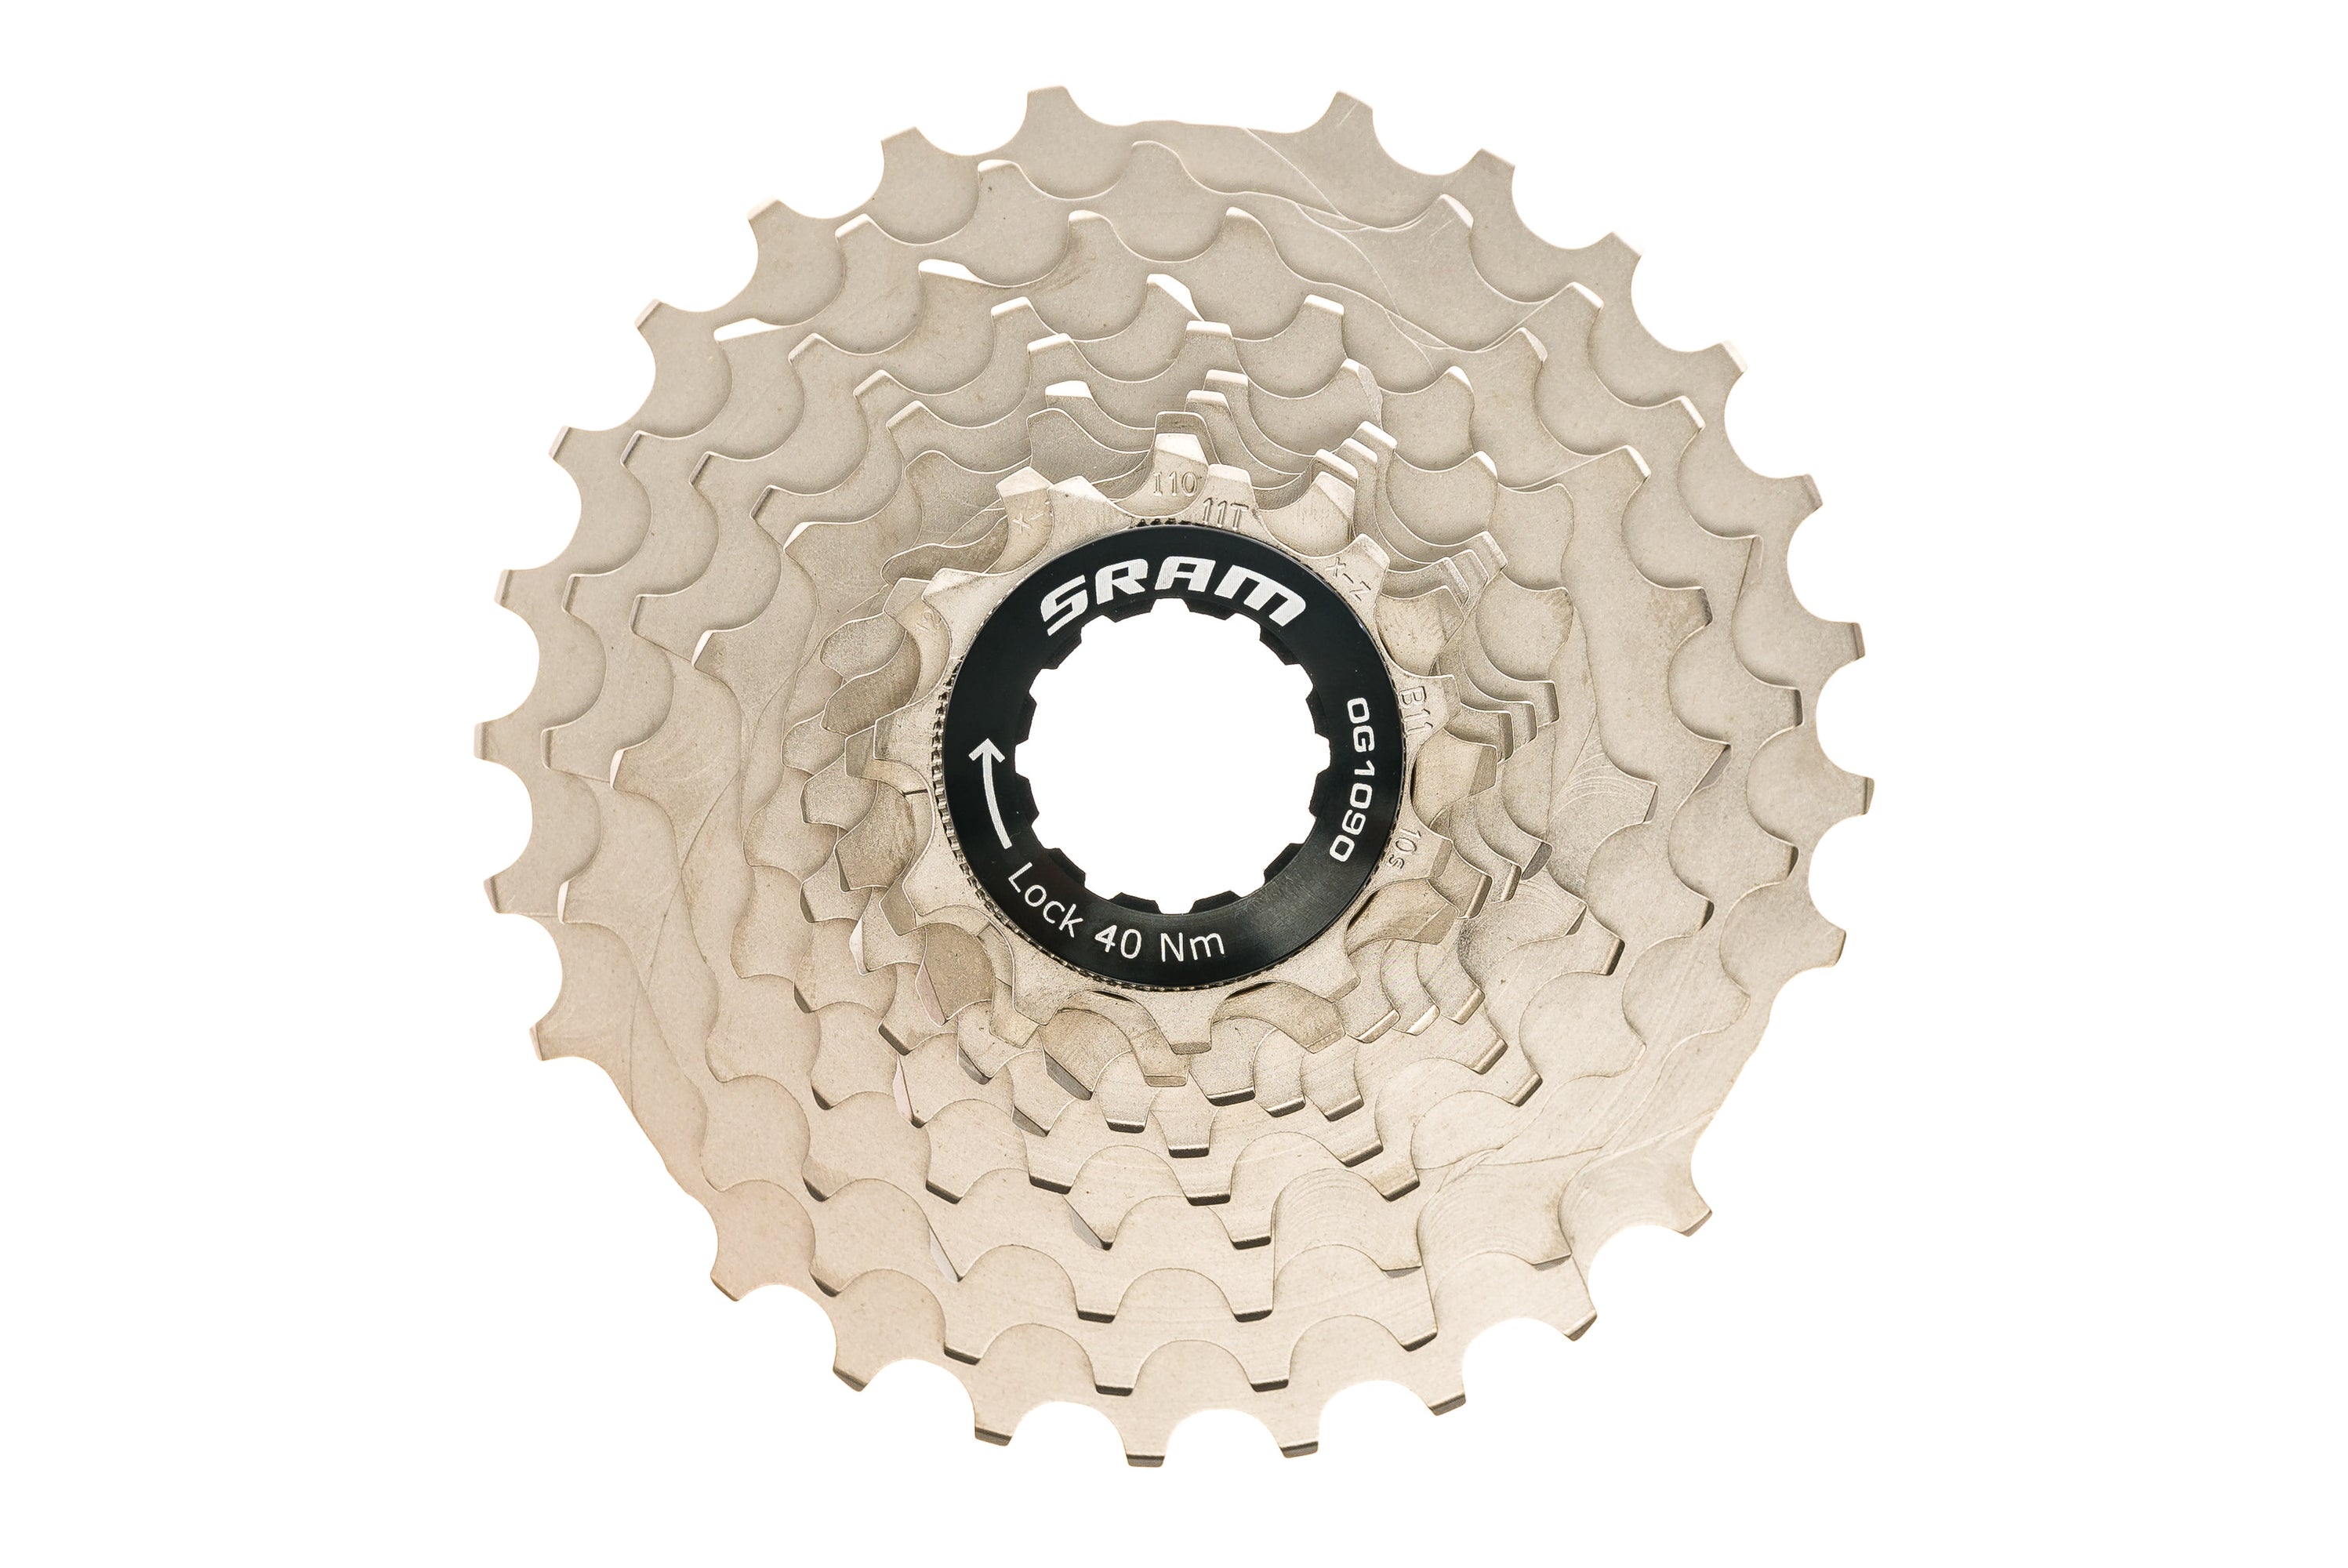 SRAM Red OG-1090 Powerdome Cassette 10 Speed 11-28T drive side